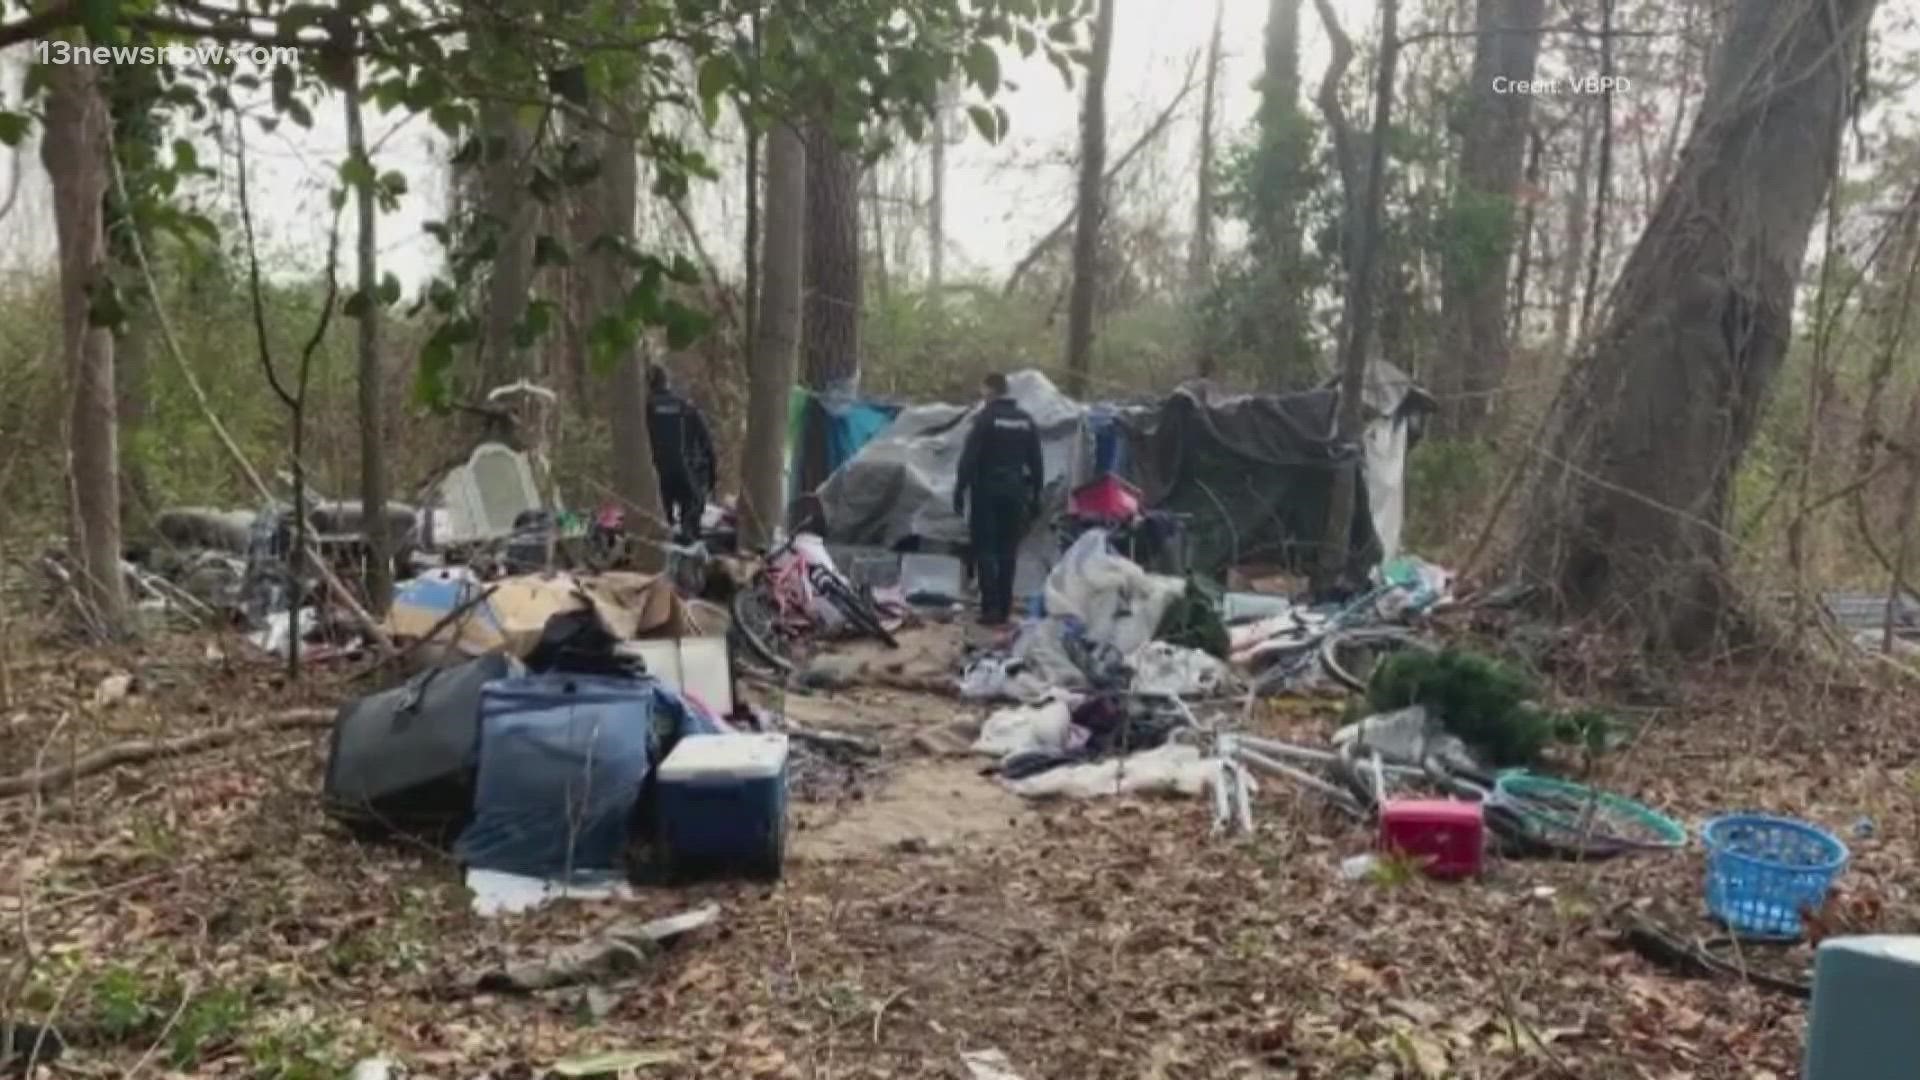 Dozens of people struggling with homelessness camped in the woods, but as more people moved in, the more dangerous things got.